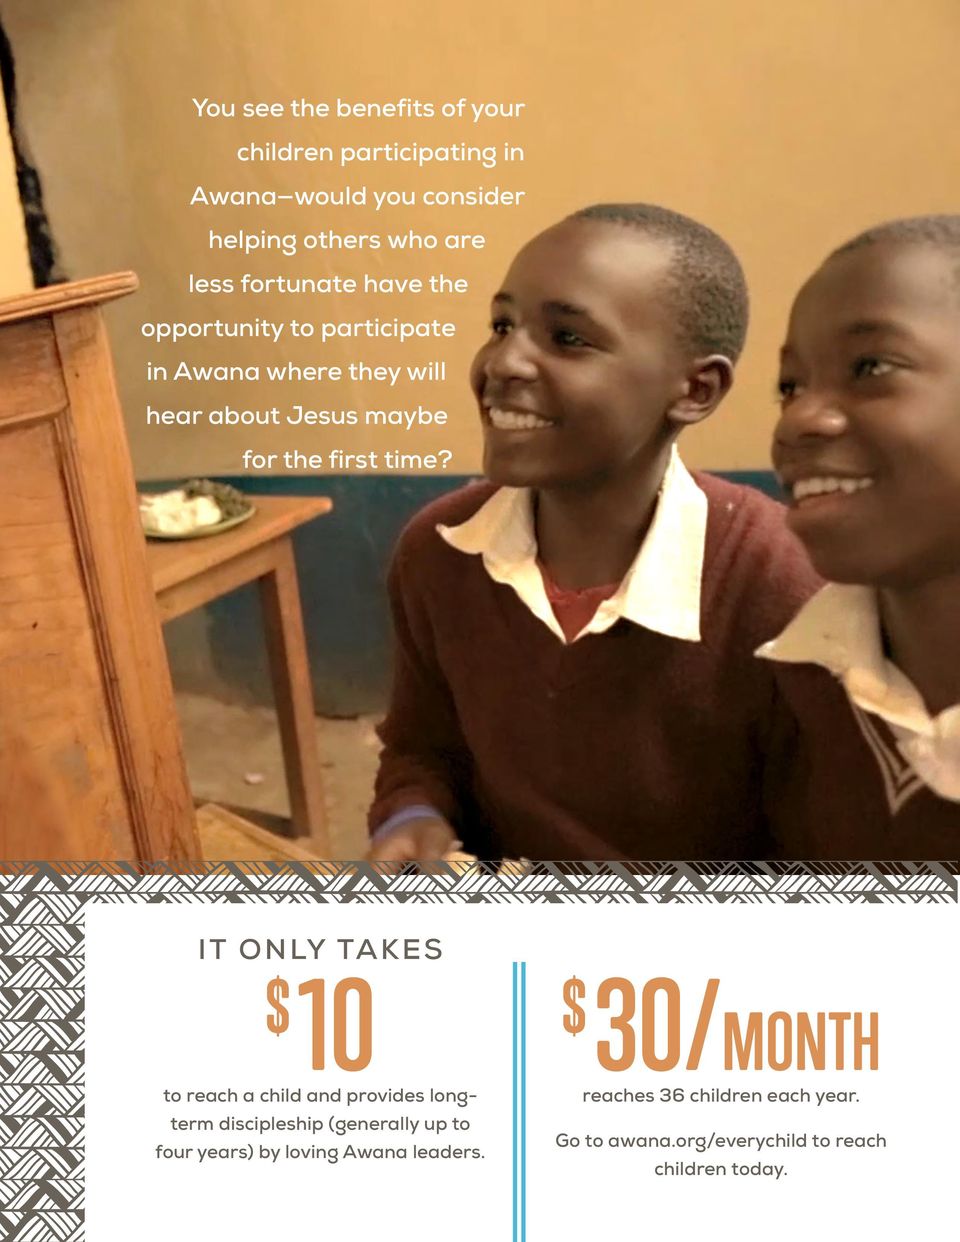 time? IT ONLY TAKES $ 10 $ 30/MONTH to reach a child and provides longterm discipleship (generally up to four